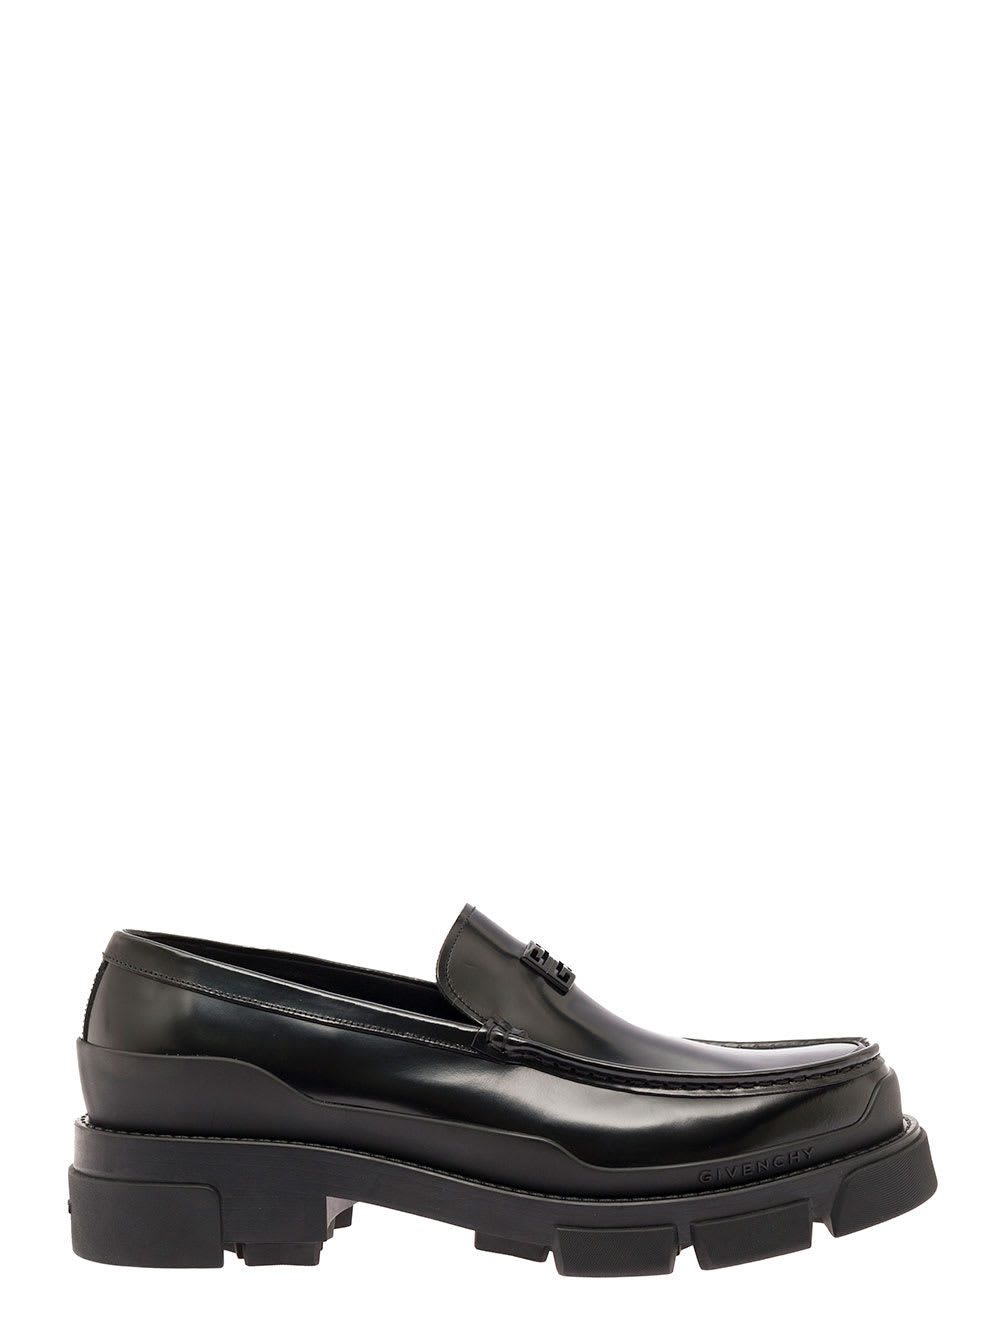 GIVENCHY TERRA BLACK LOAFERS WITH LOGO AND CHUNKY PLATFORM IN LEATHER MAN